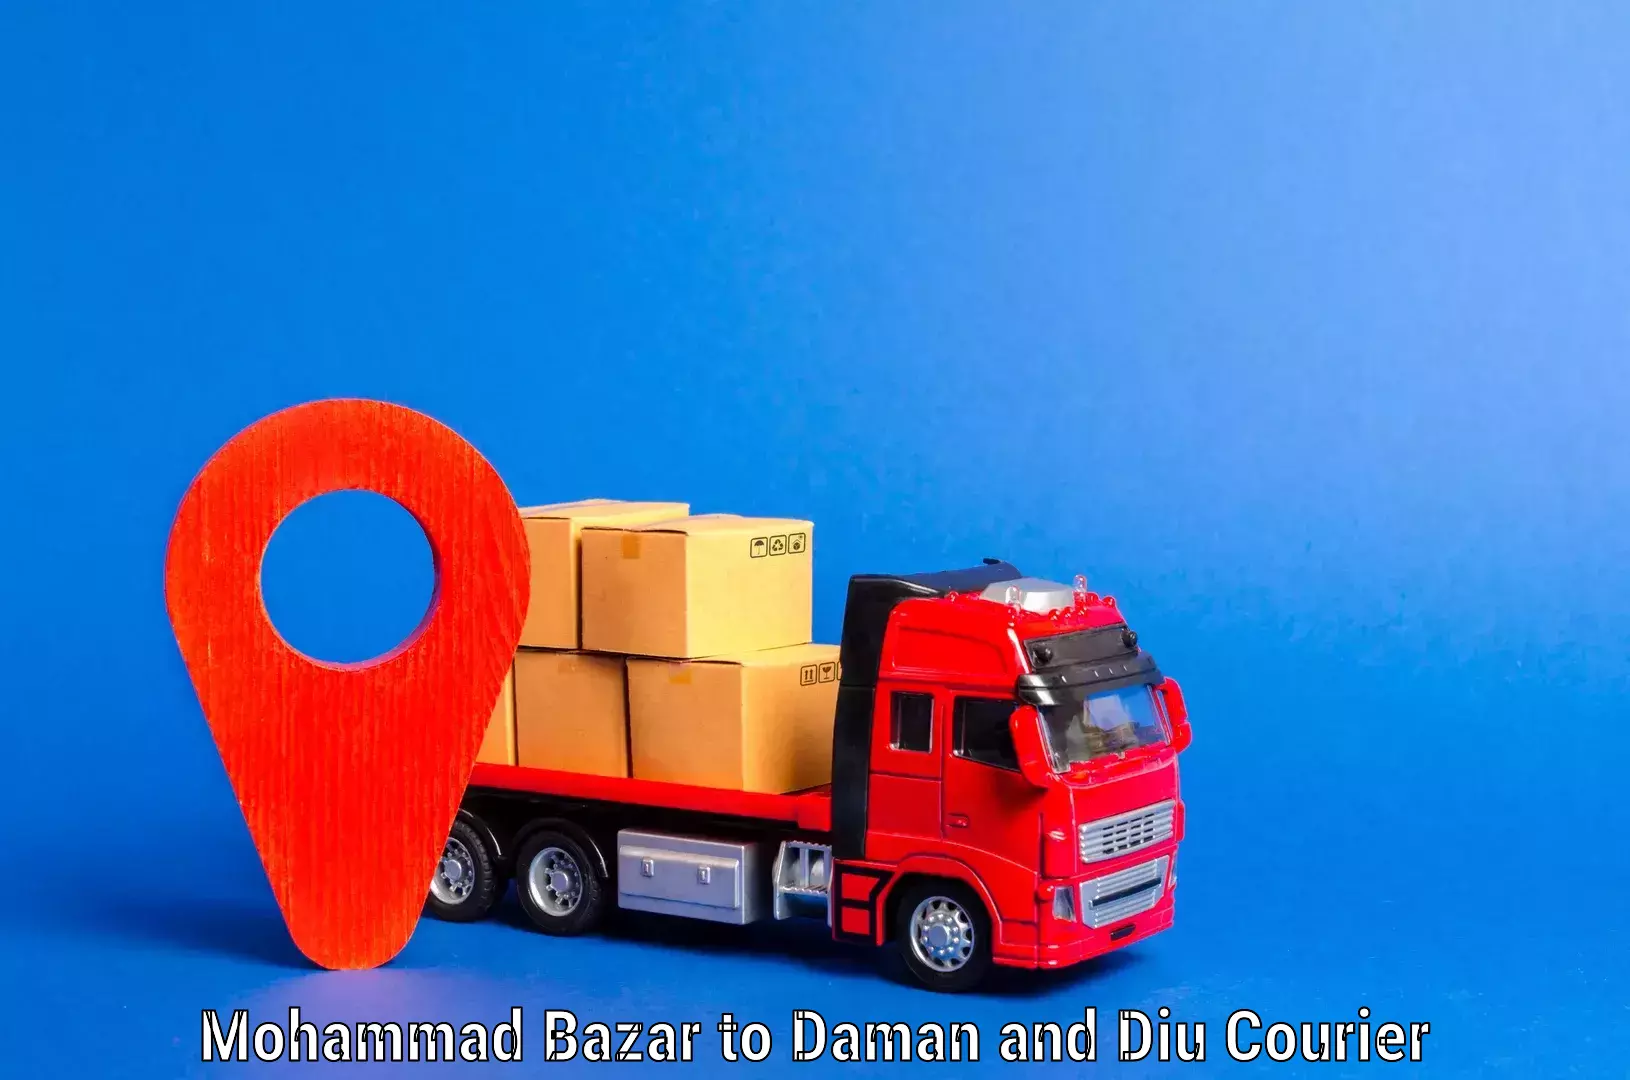 Furniture moving experts Mohammad Bazar to Daman and Diu